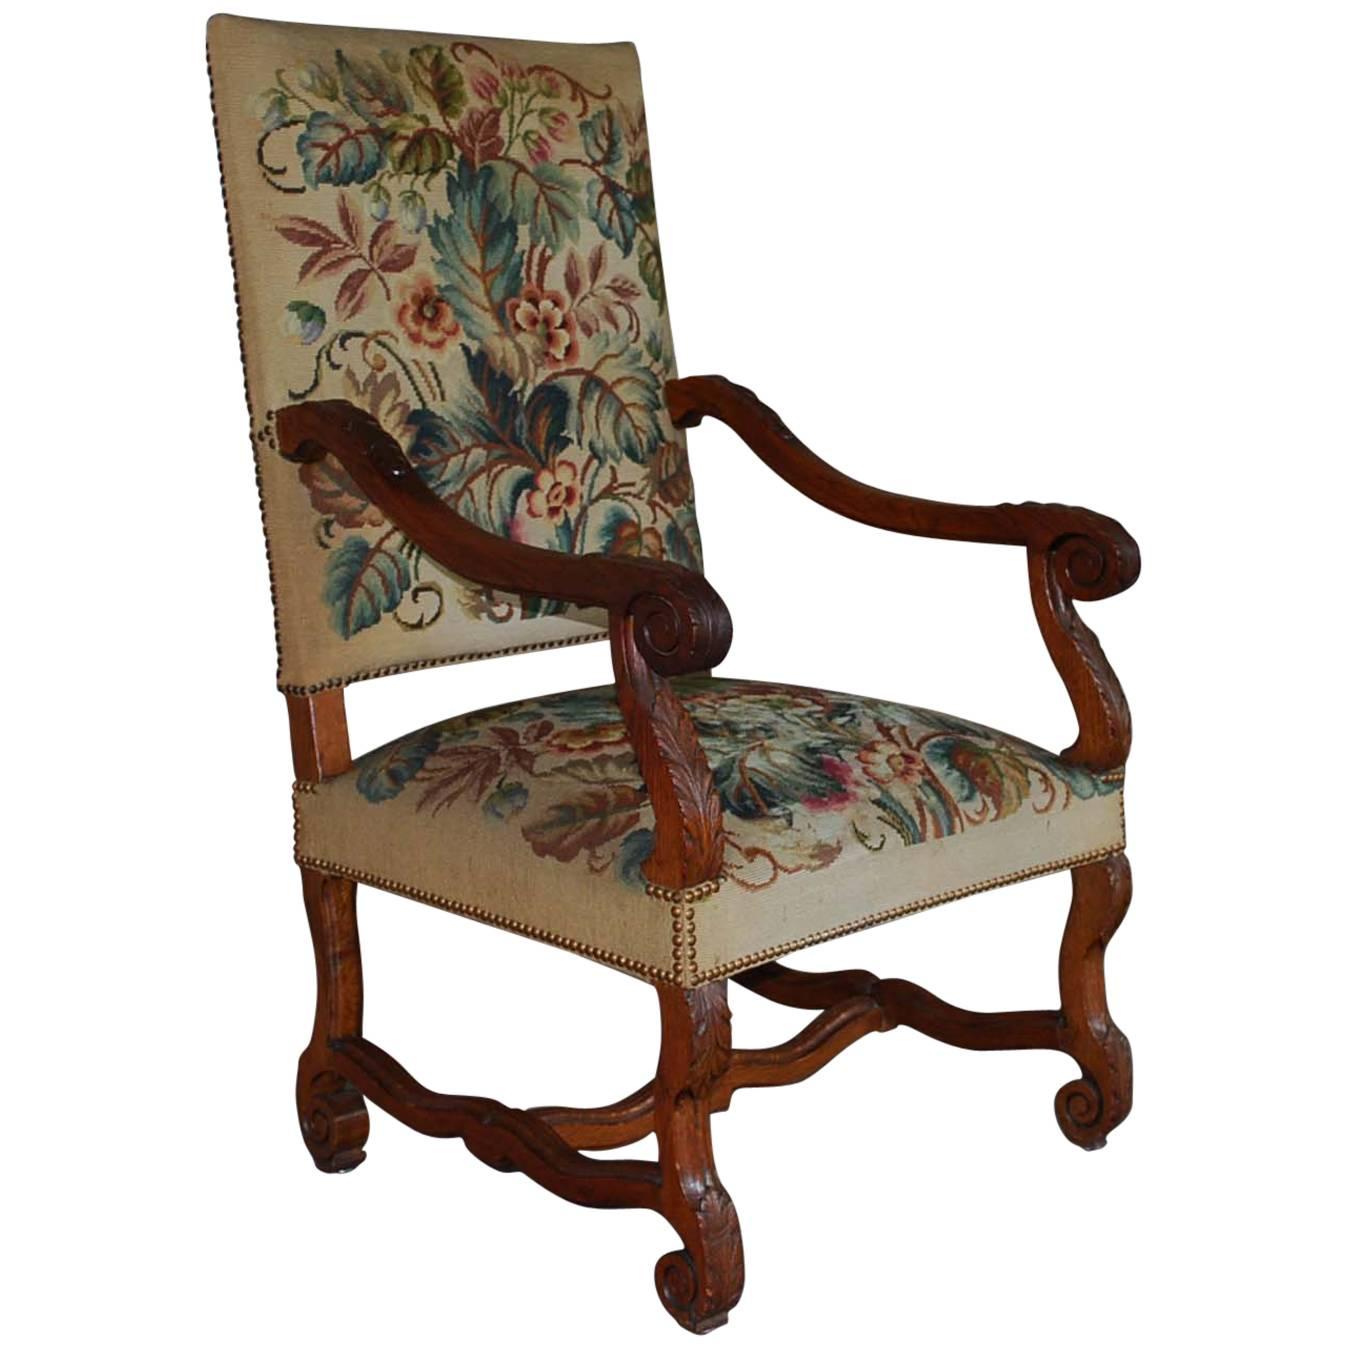 Late 19th Century Parlor Chair With Needlework Upholstery For Sale